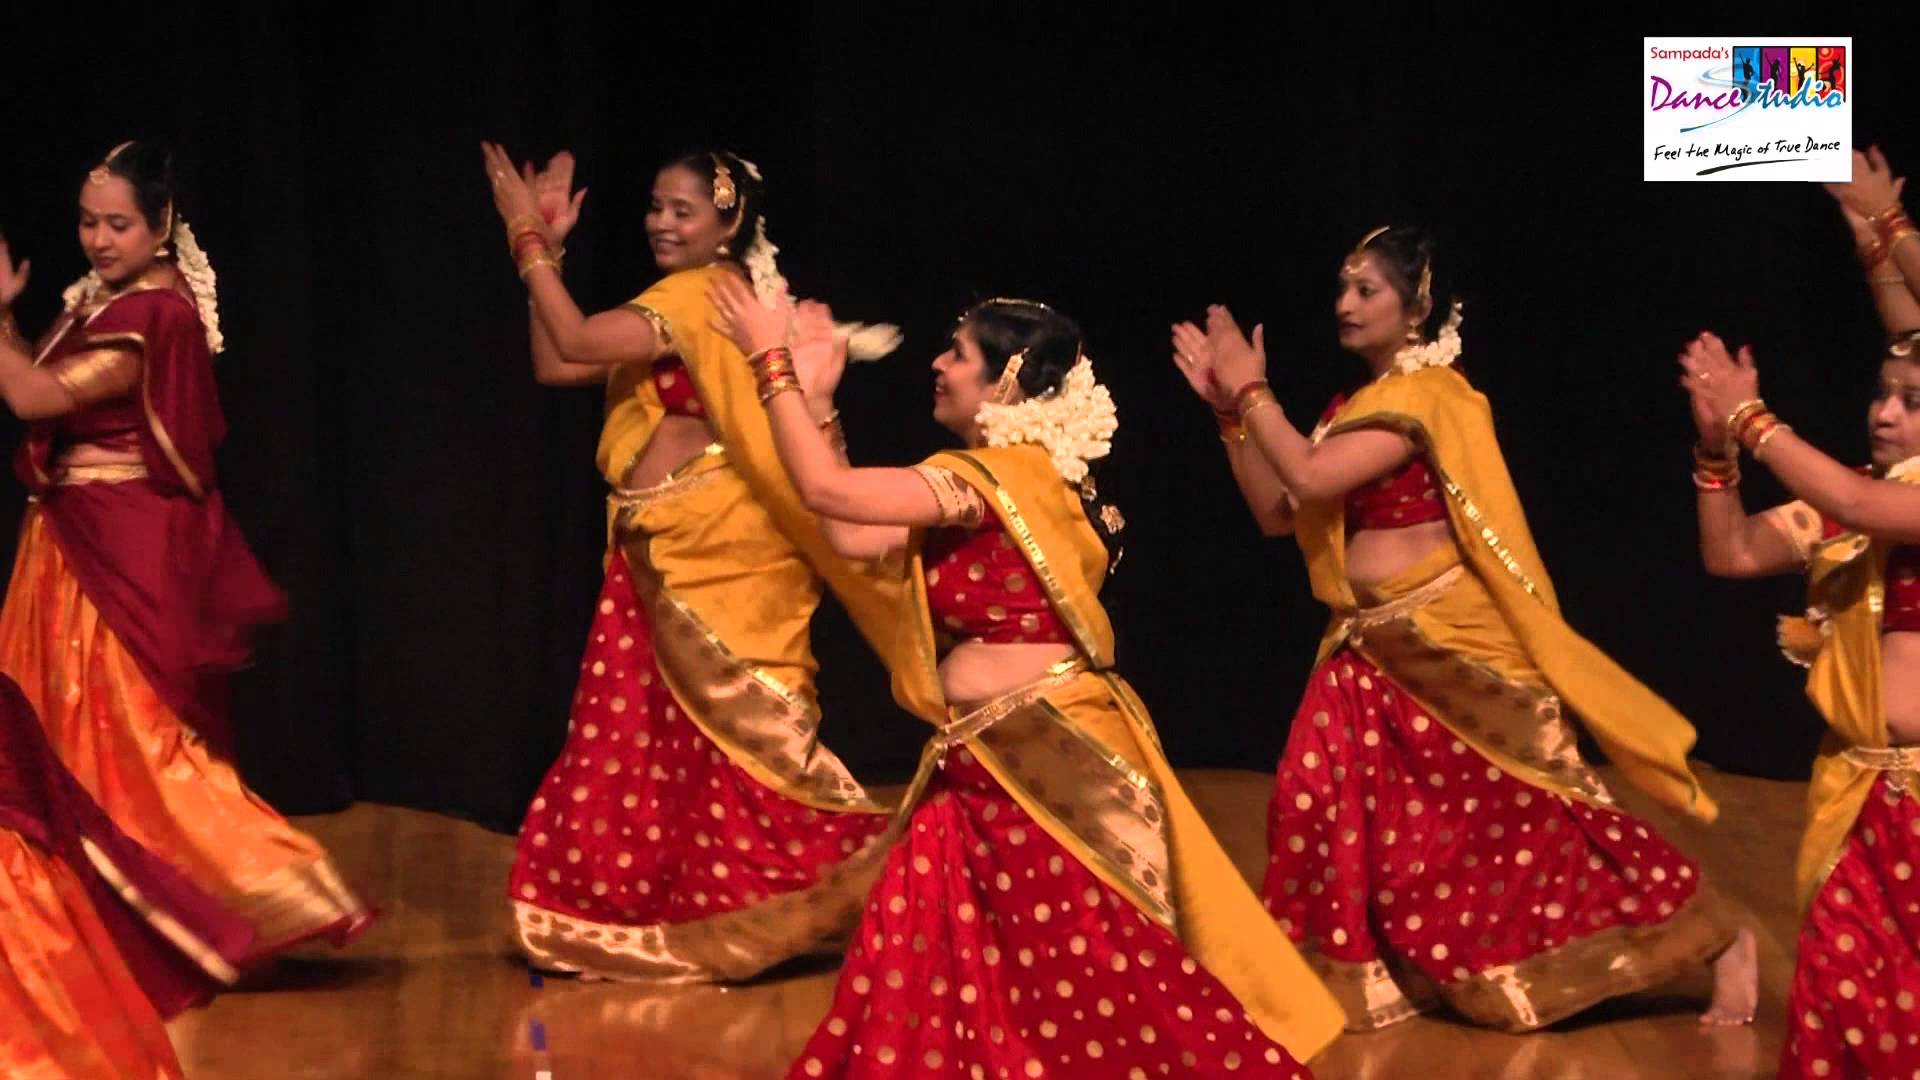 Ladies dance performance on a medley of south Indian song